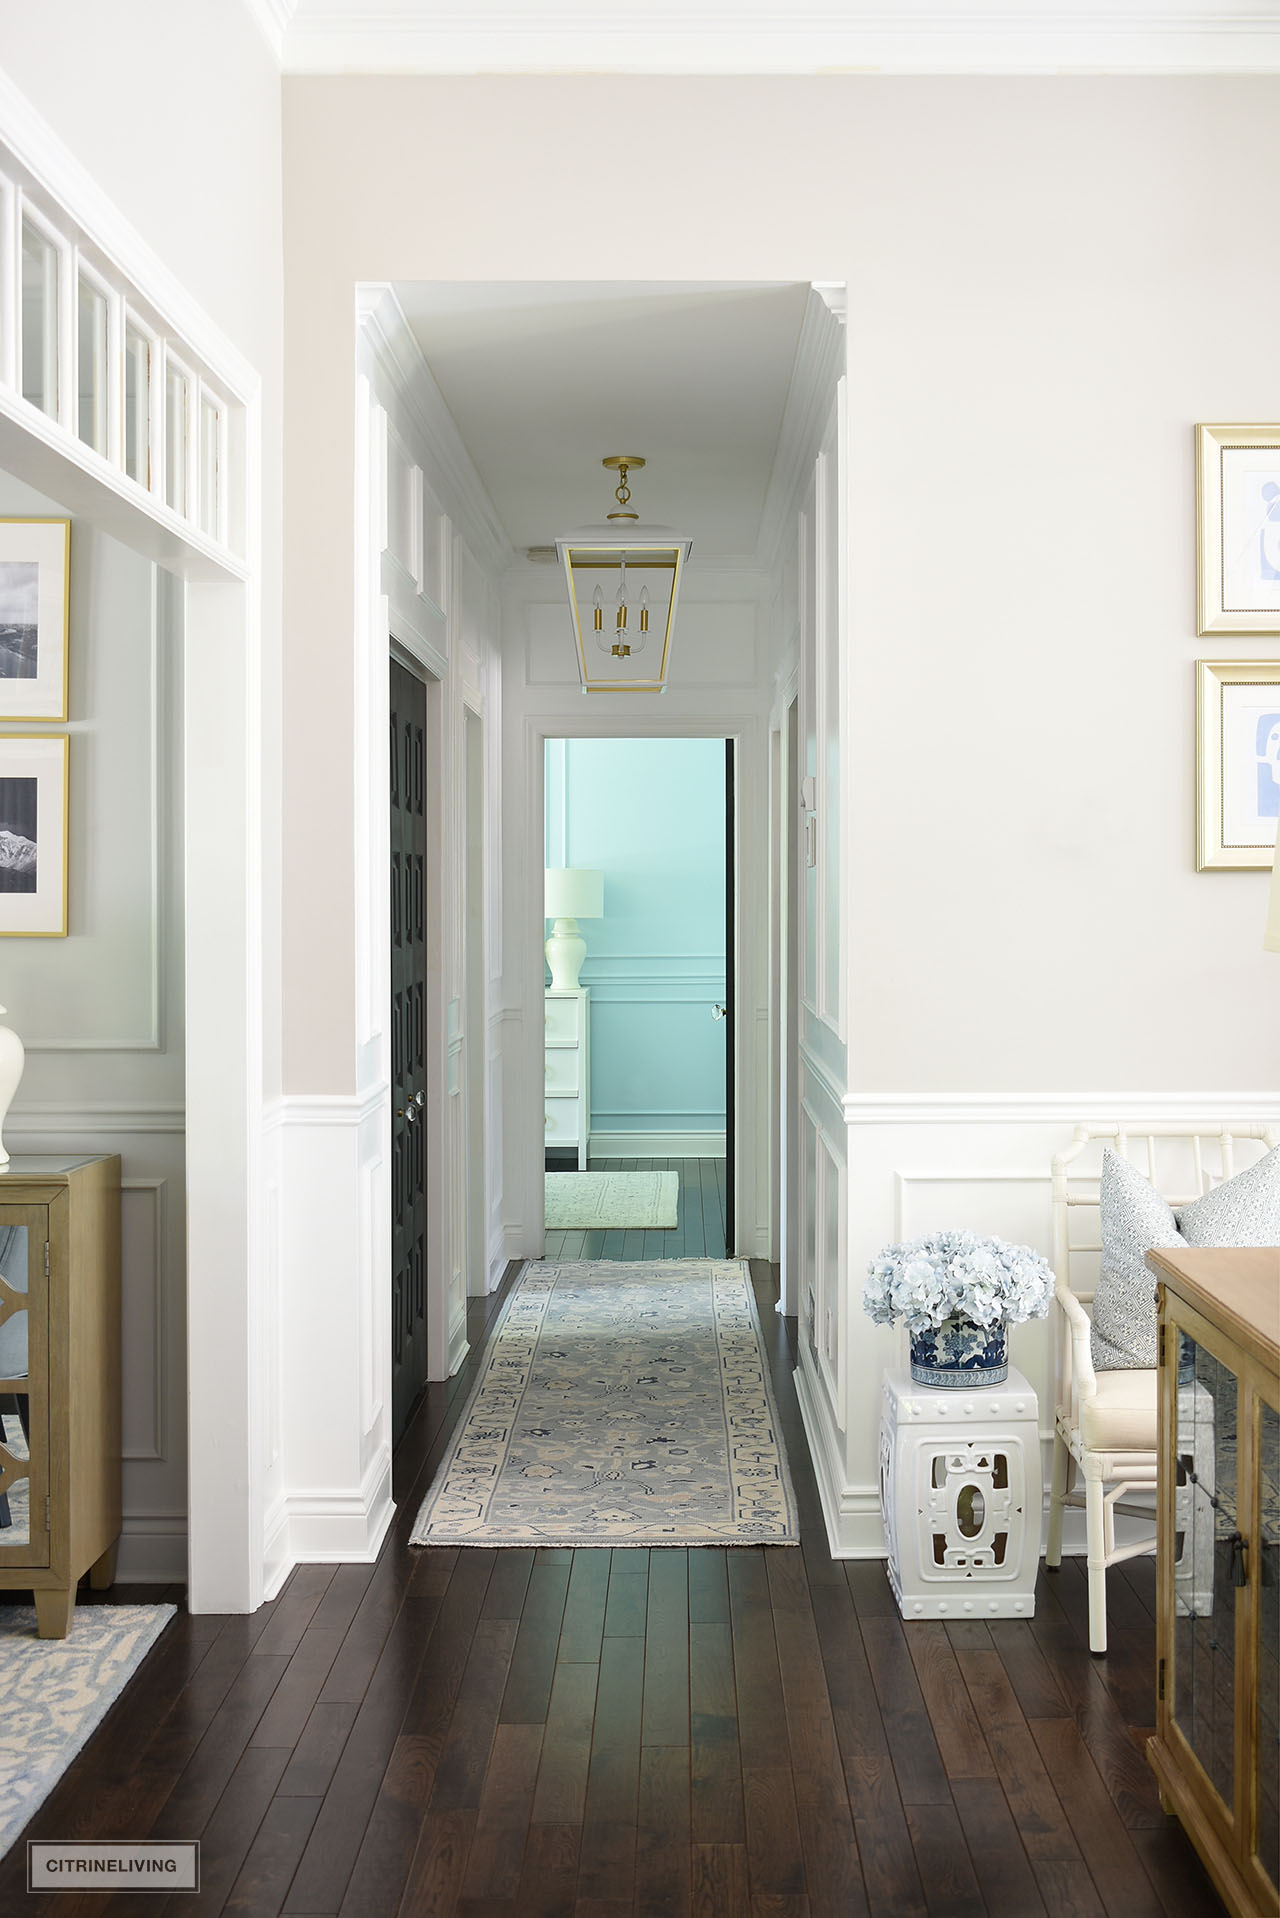 A view of a narrow hallway painted white in Behr Ultra Pure White, semigloss paint. Crown and applied wall moldings are elegant and the large oversized pendant light in white and gold is a sophisticated touch. A light blue oushak runner brightens up the dark hardwood floor.